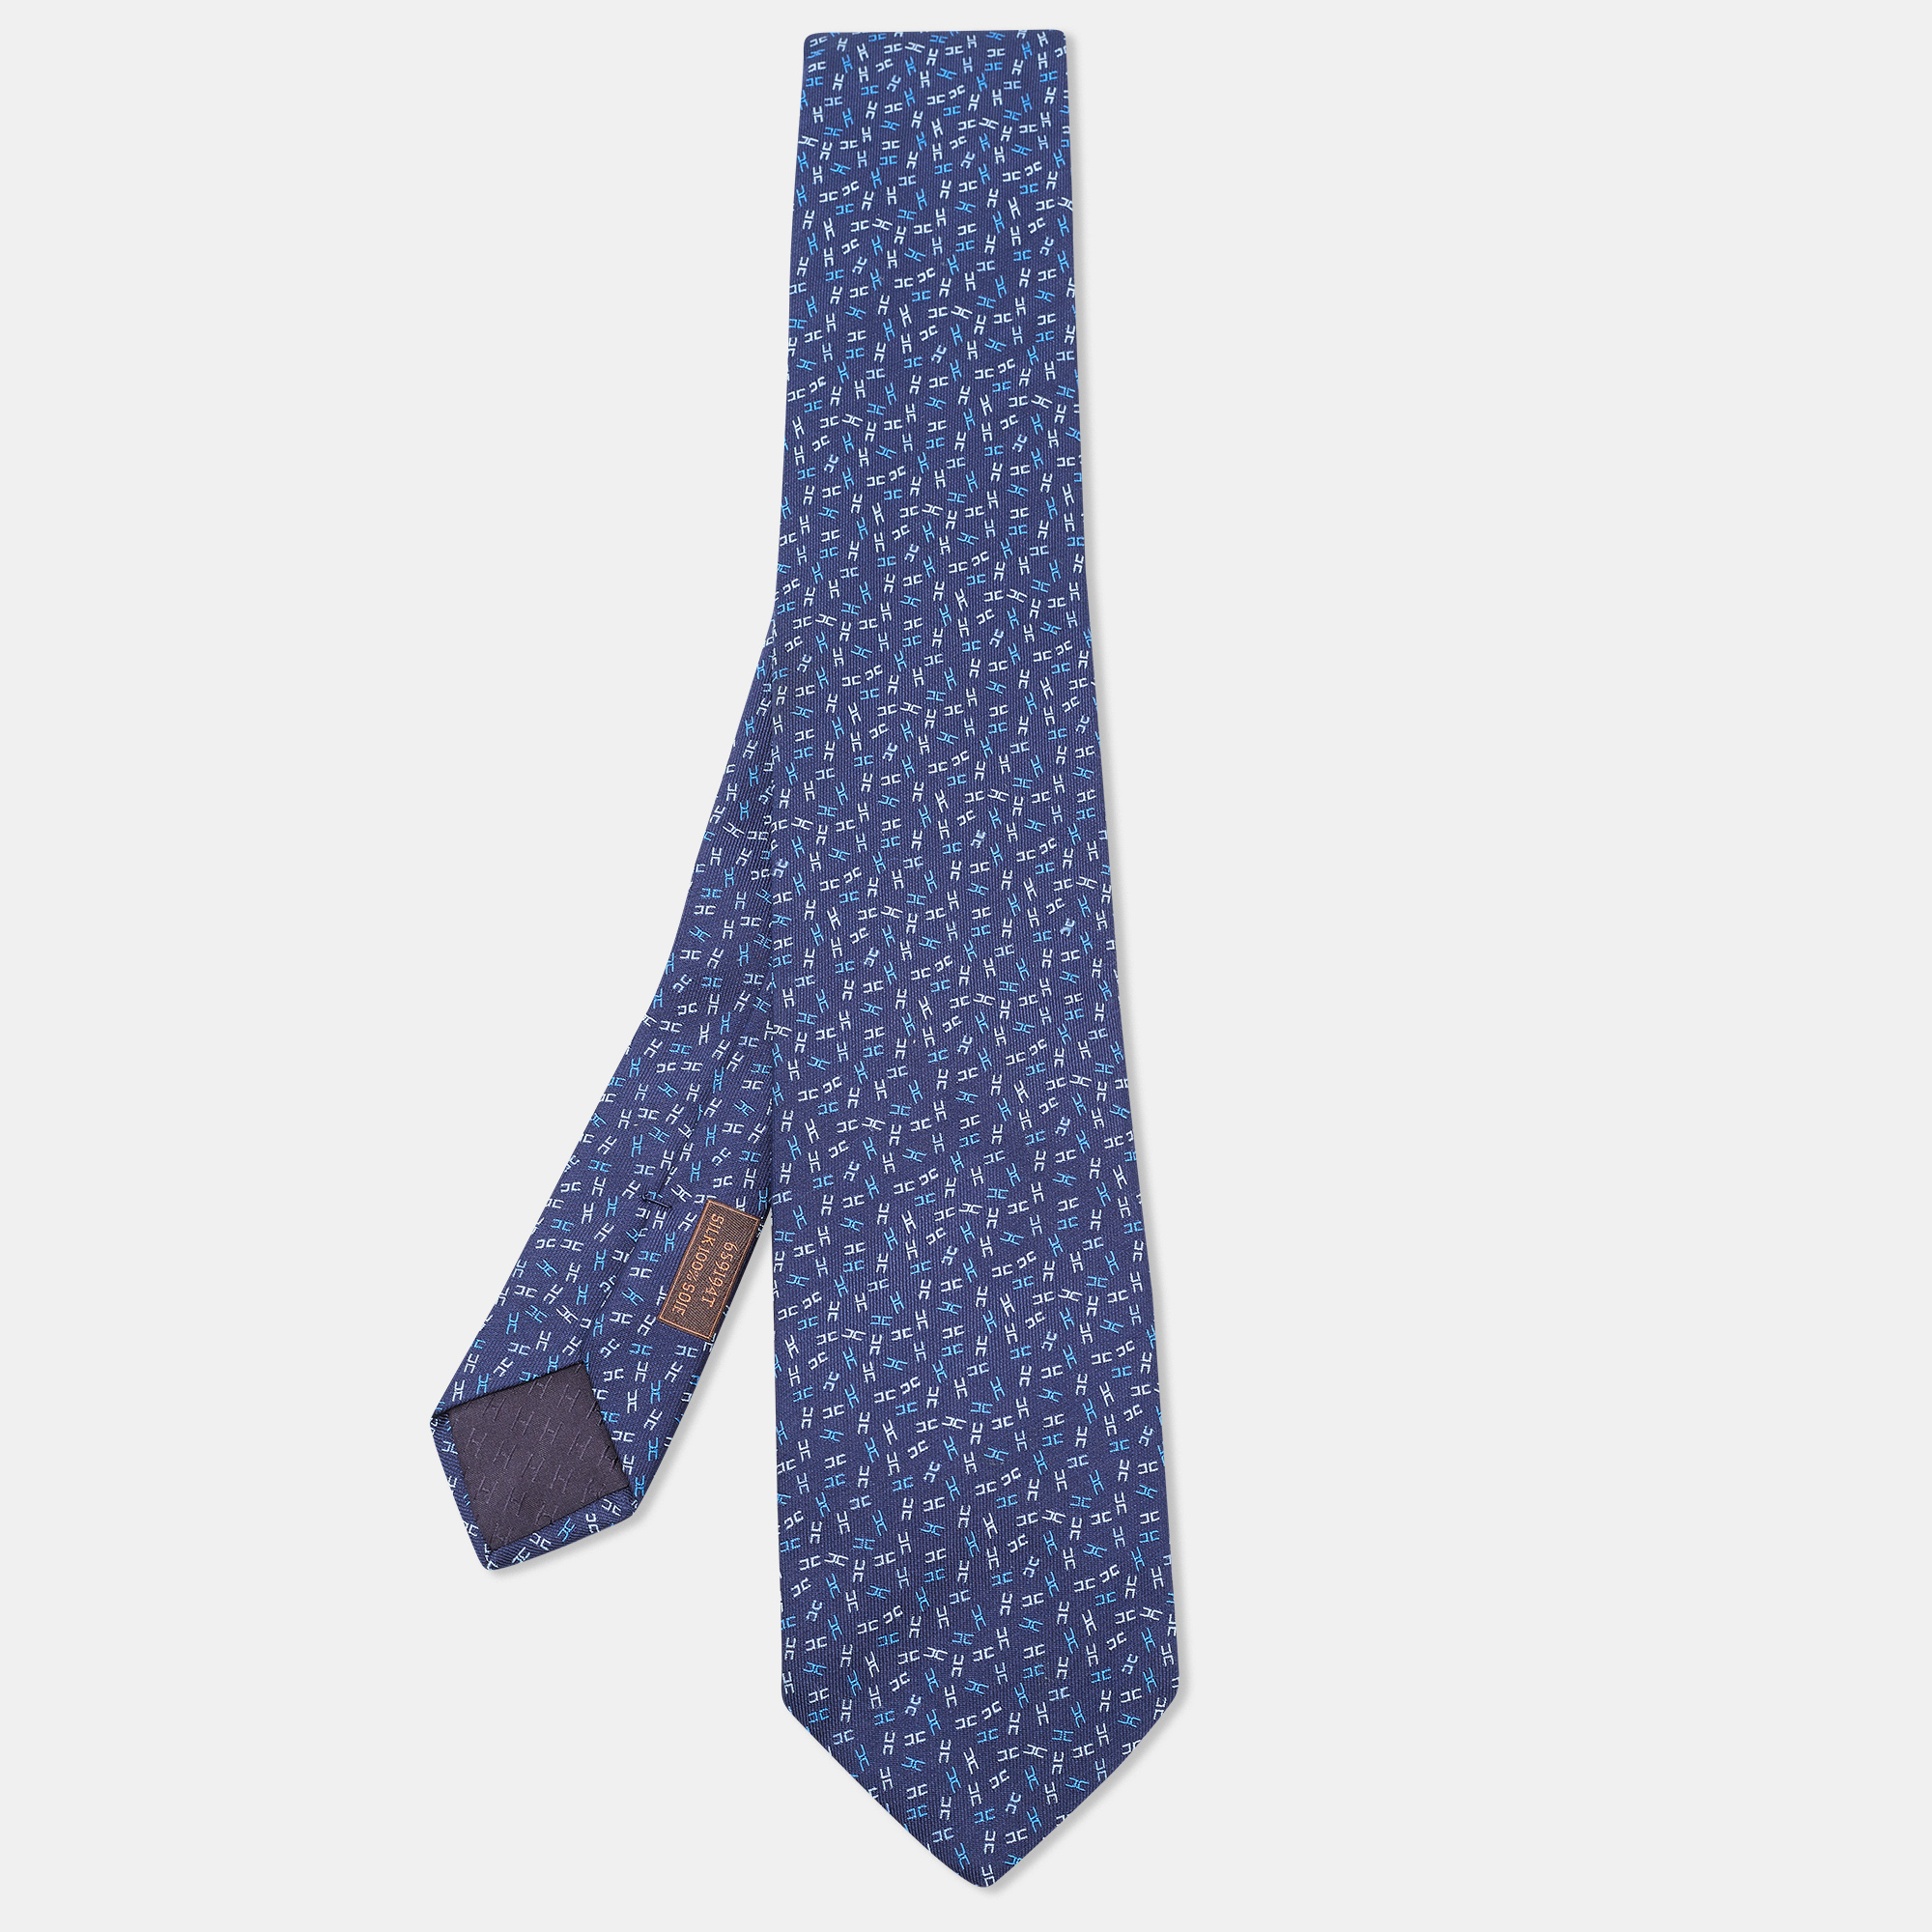 Pick this Hermes tie to give your formal look a touch of luxury. It is cut from silk and detailed with patterns all over. It is finished with the brand label on the back.